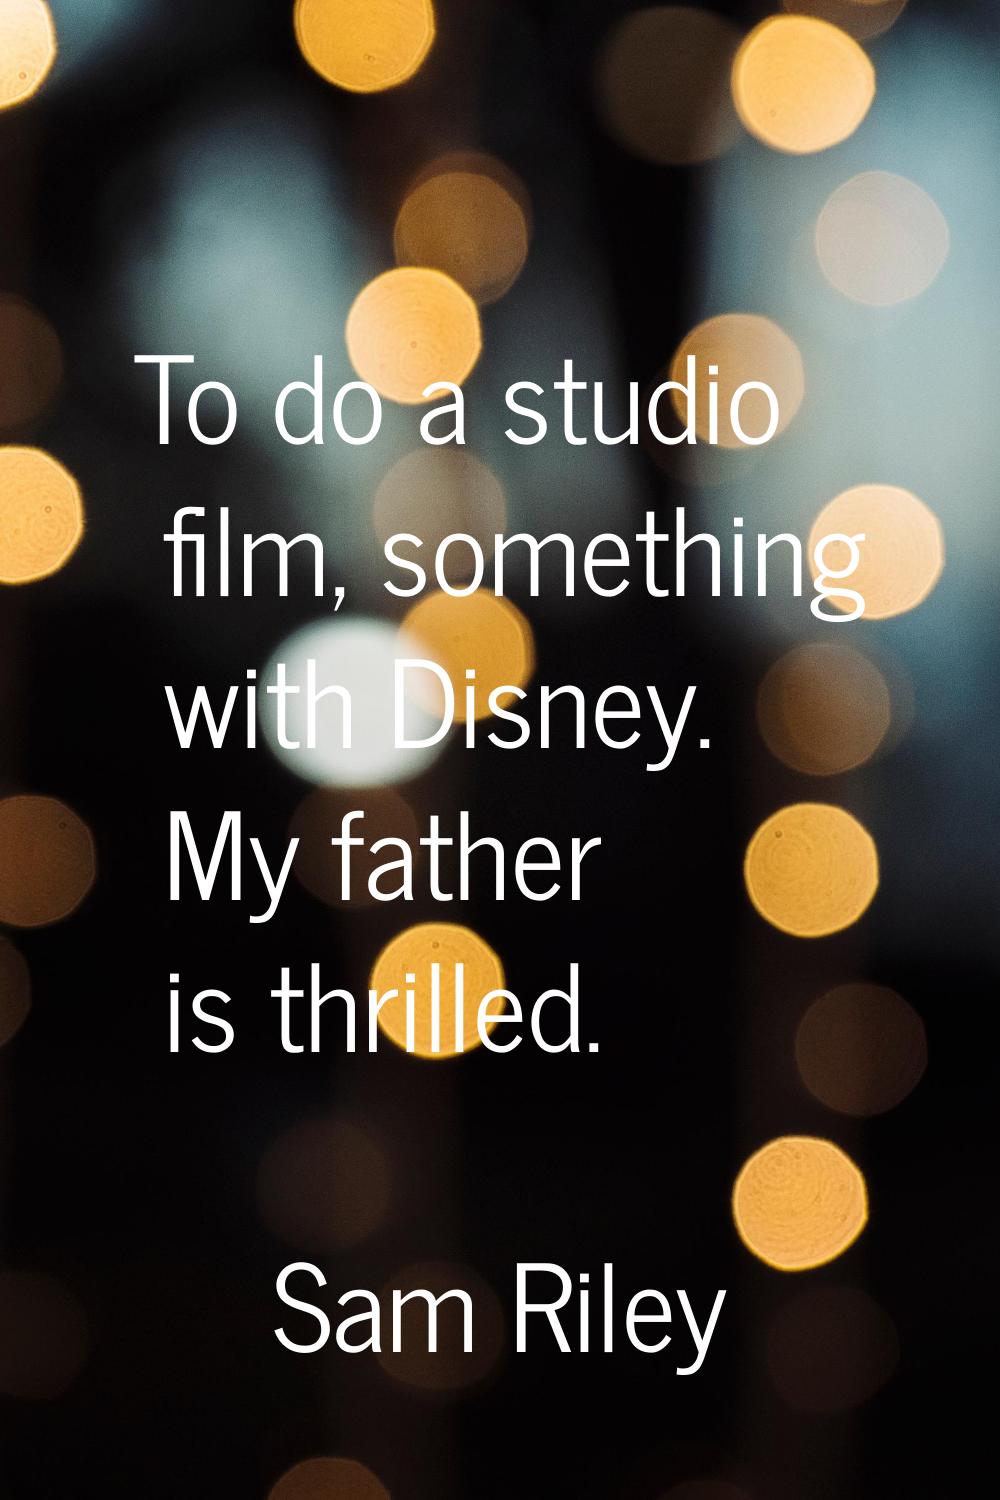 To do a studio film, something with Disney. My father is thrilled.